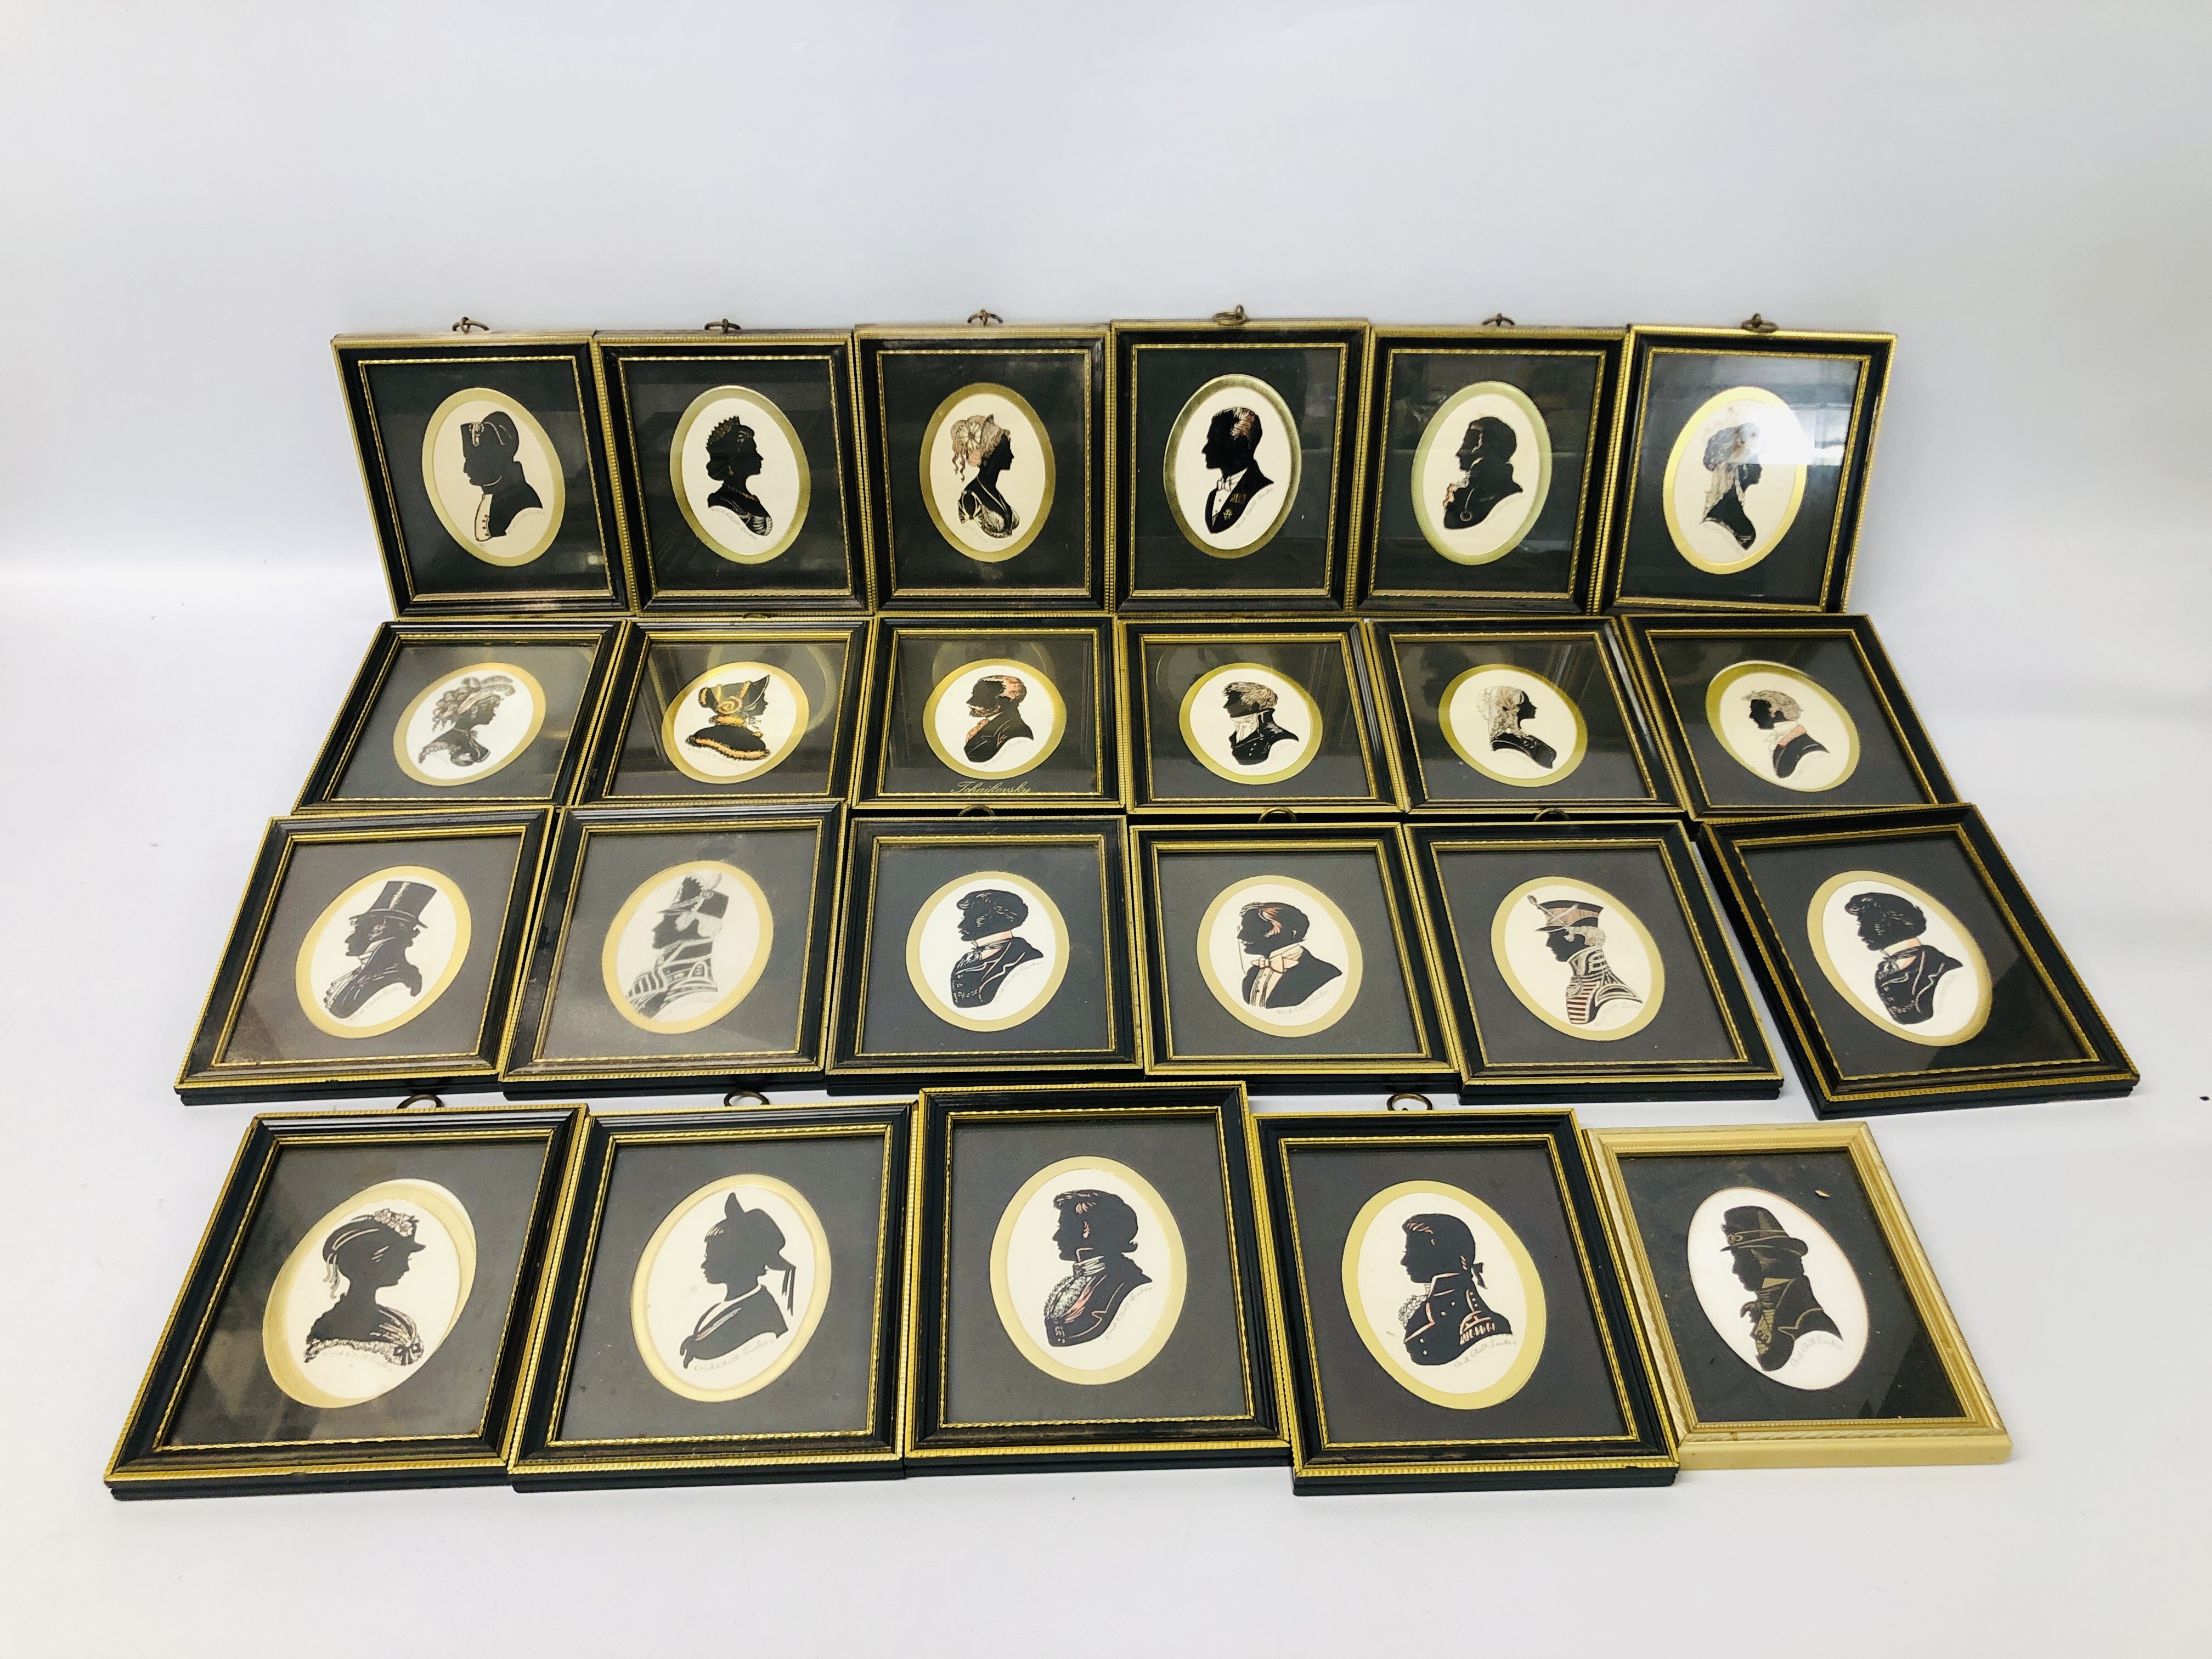 COLLECTION OF 23 "THE PENNYFARTHING GALLERIES" FRAMED SILHOUETTES